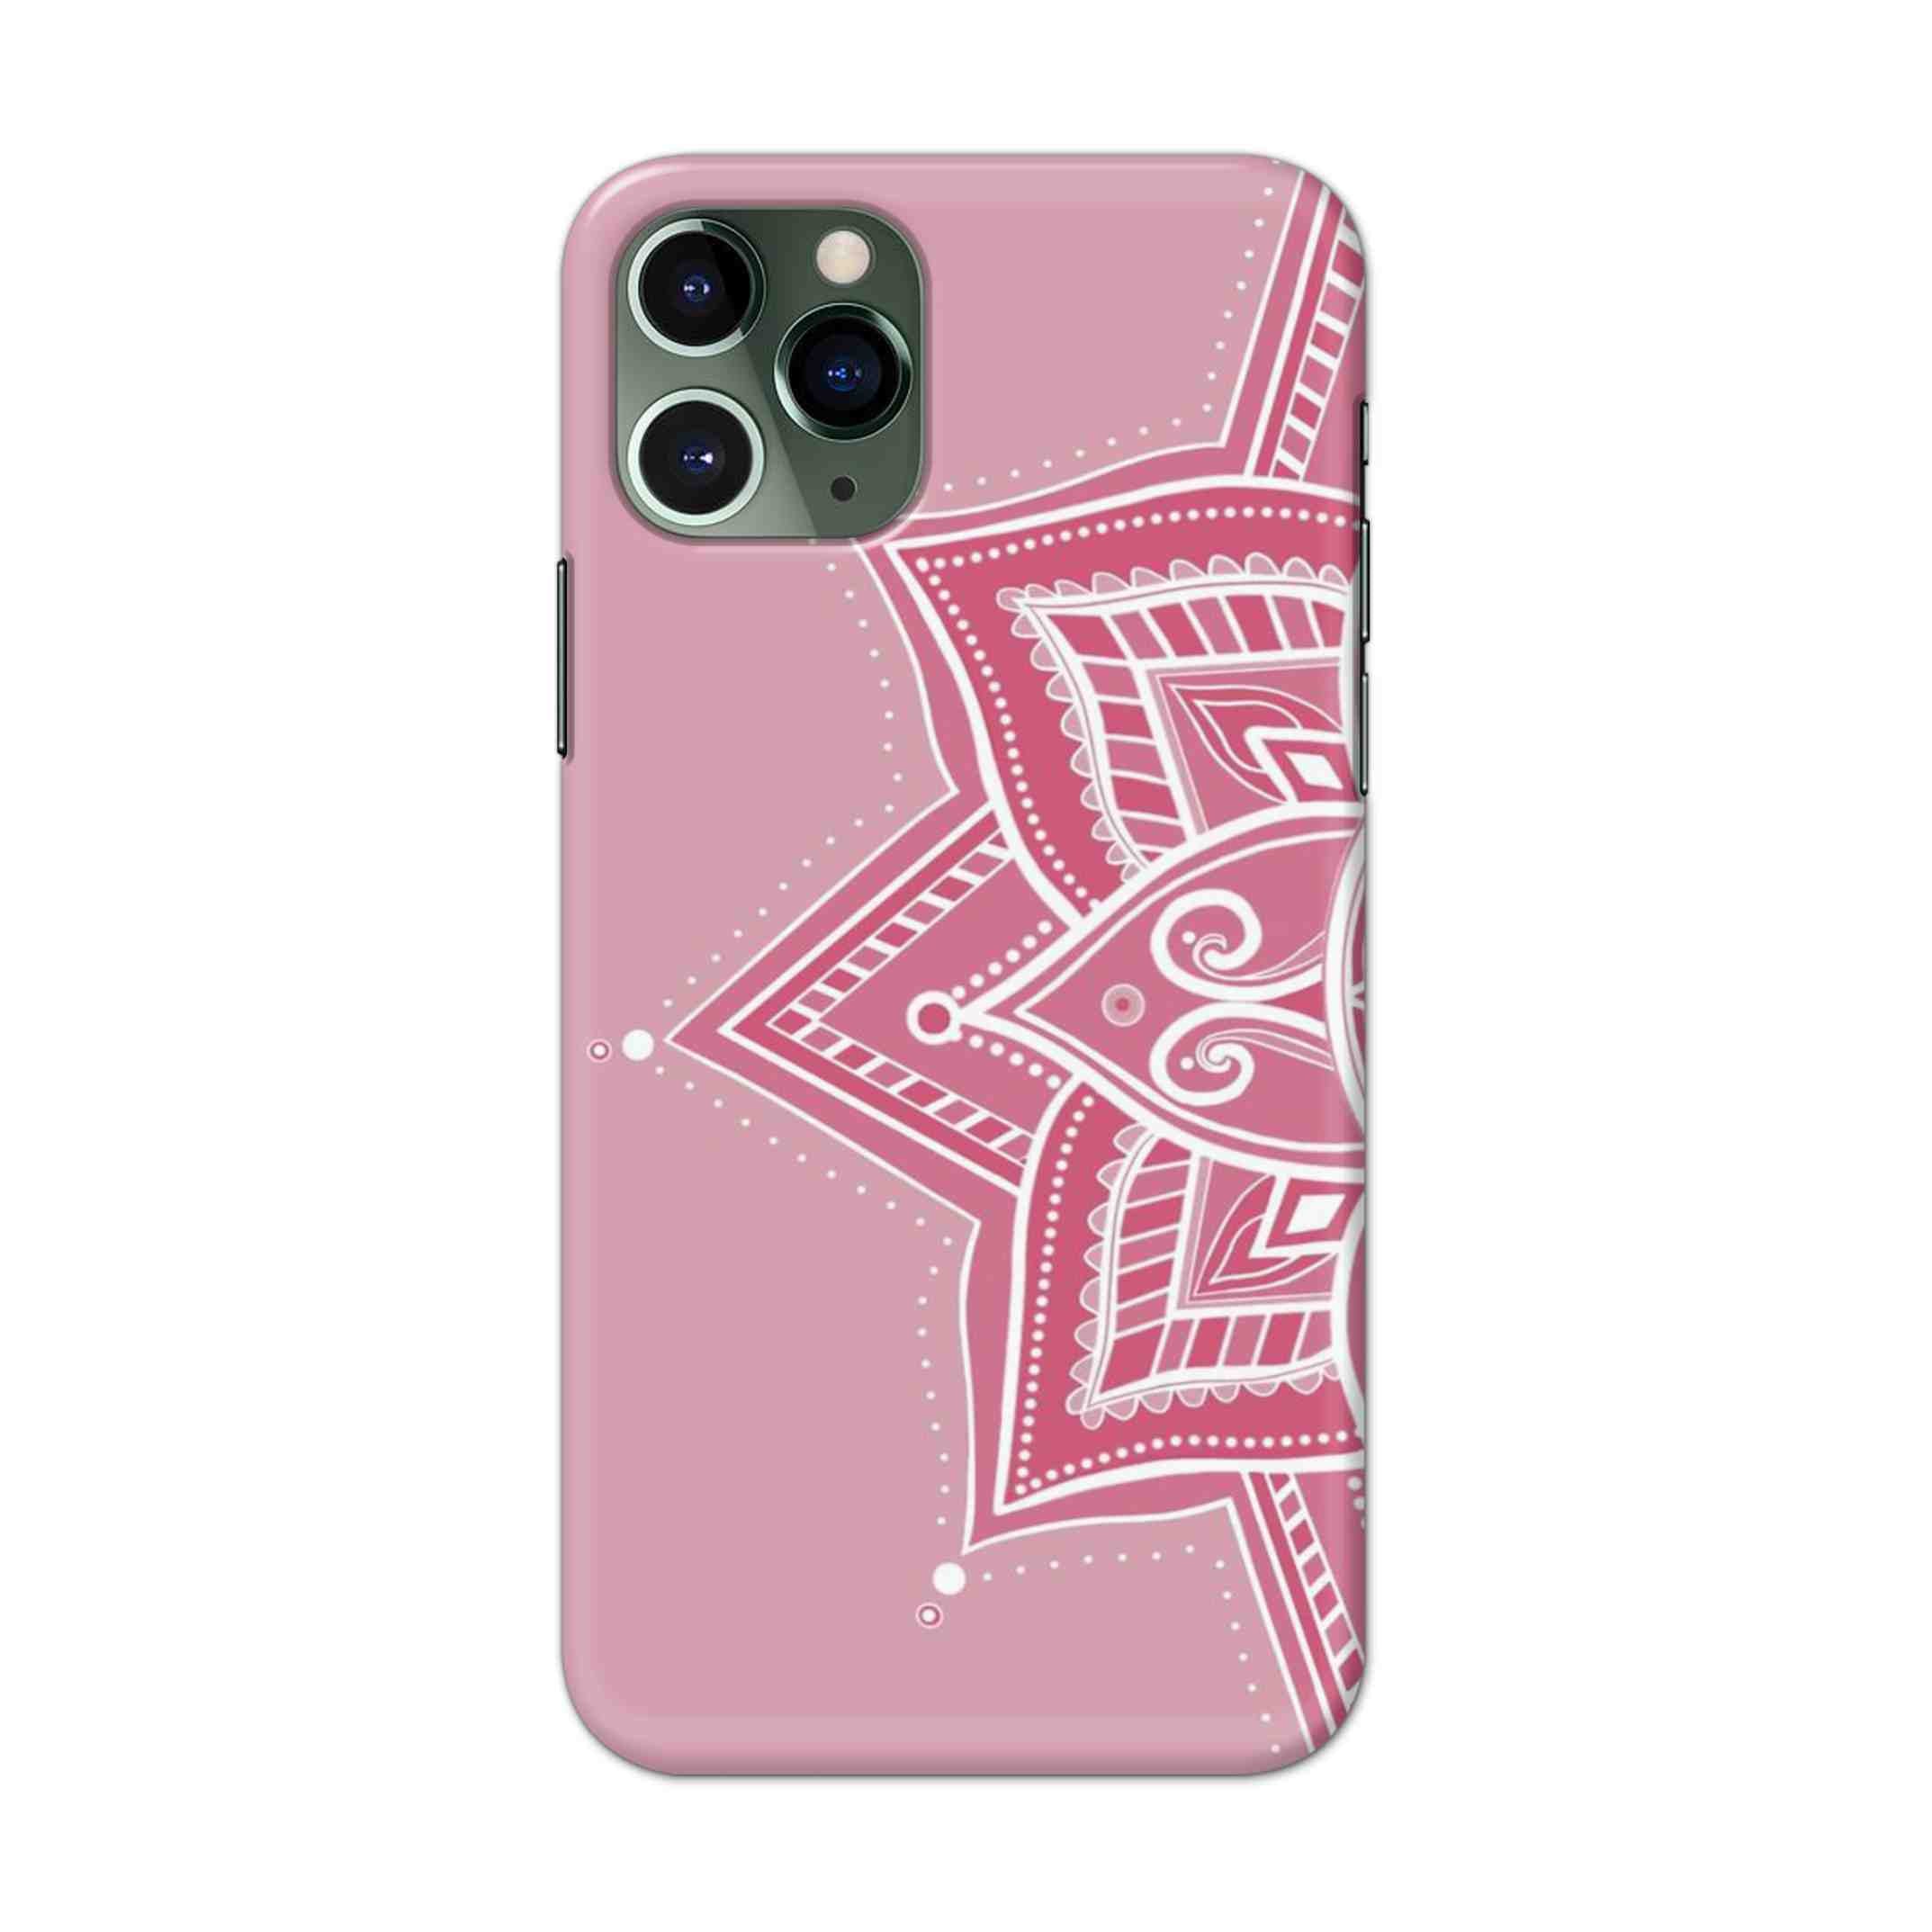 Buy Pink Rangoli Hard Back Mobile Phone Case/Cover For iPhone 11 Pro Online